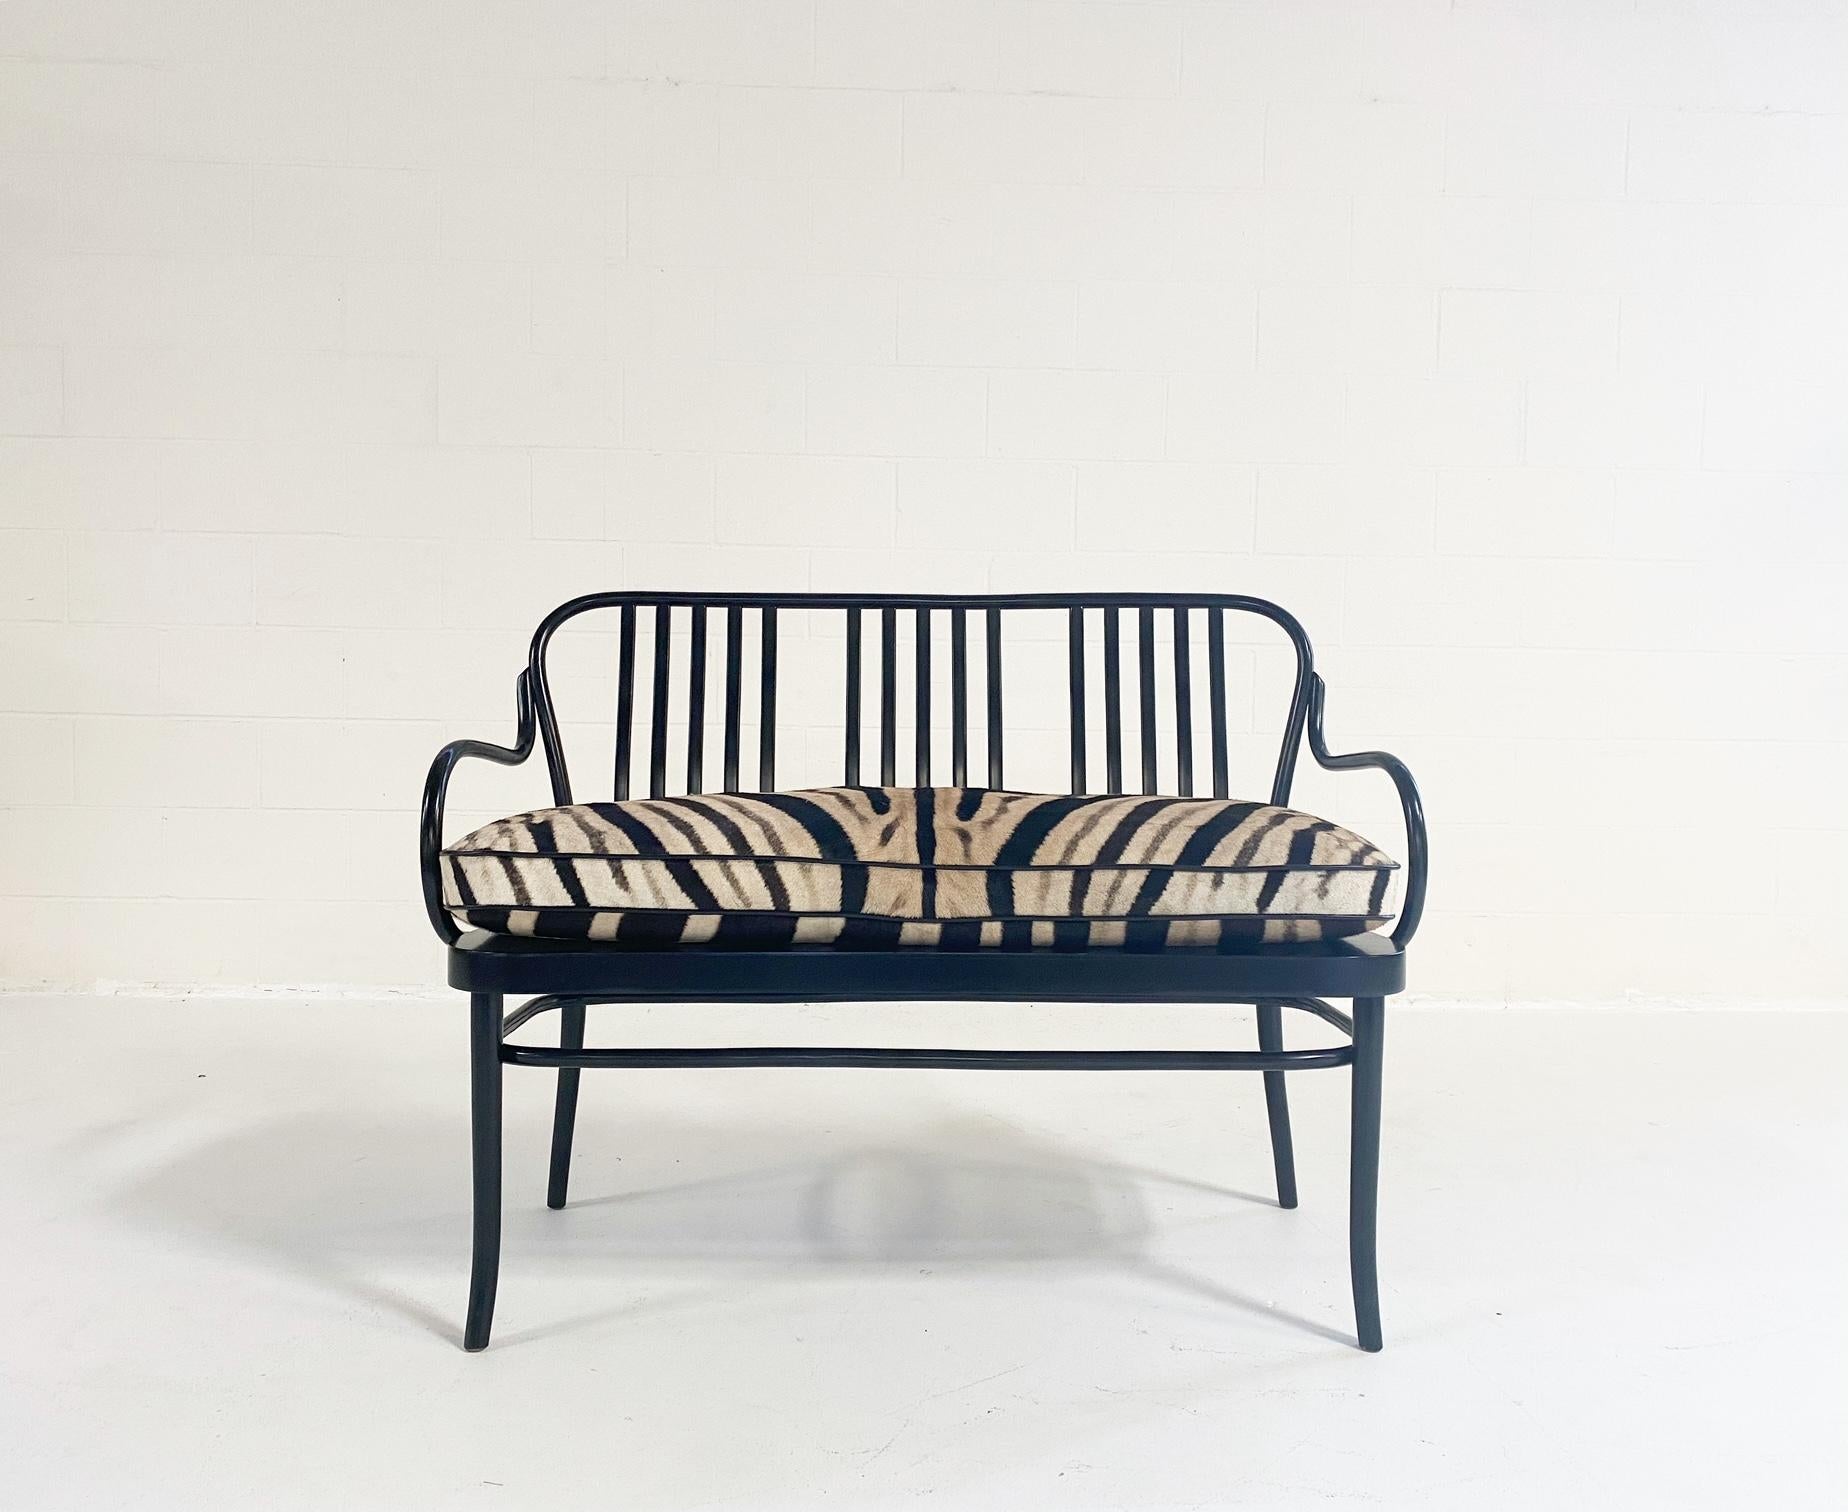 Mid-20th Century Josef Frank for Thonet Bentwood Bench with Zebra Hide Cushion